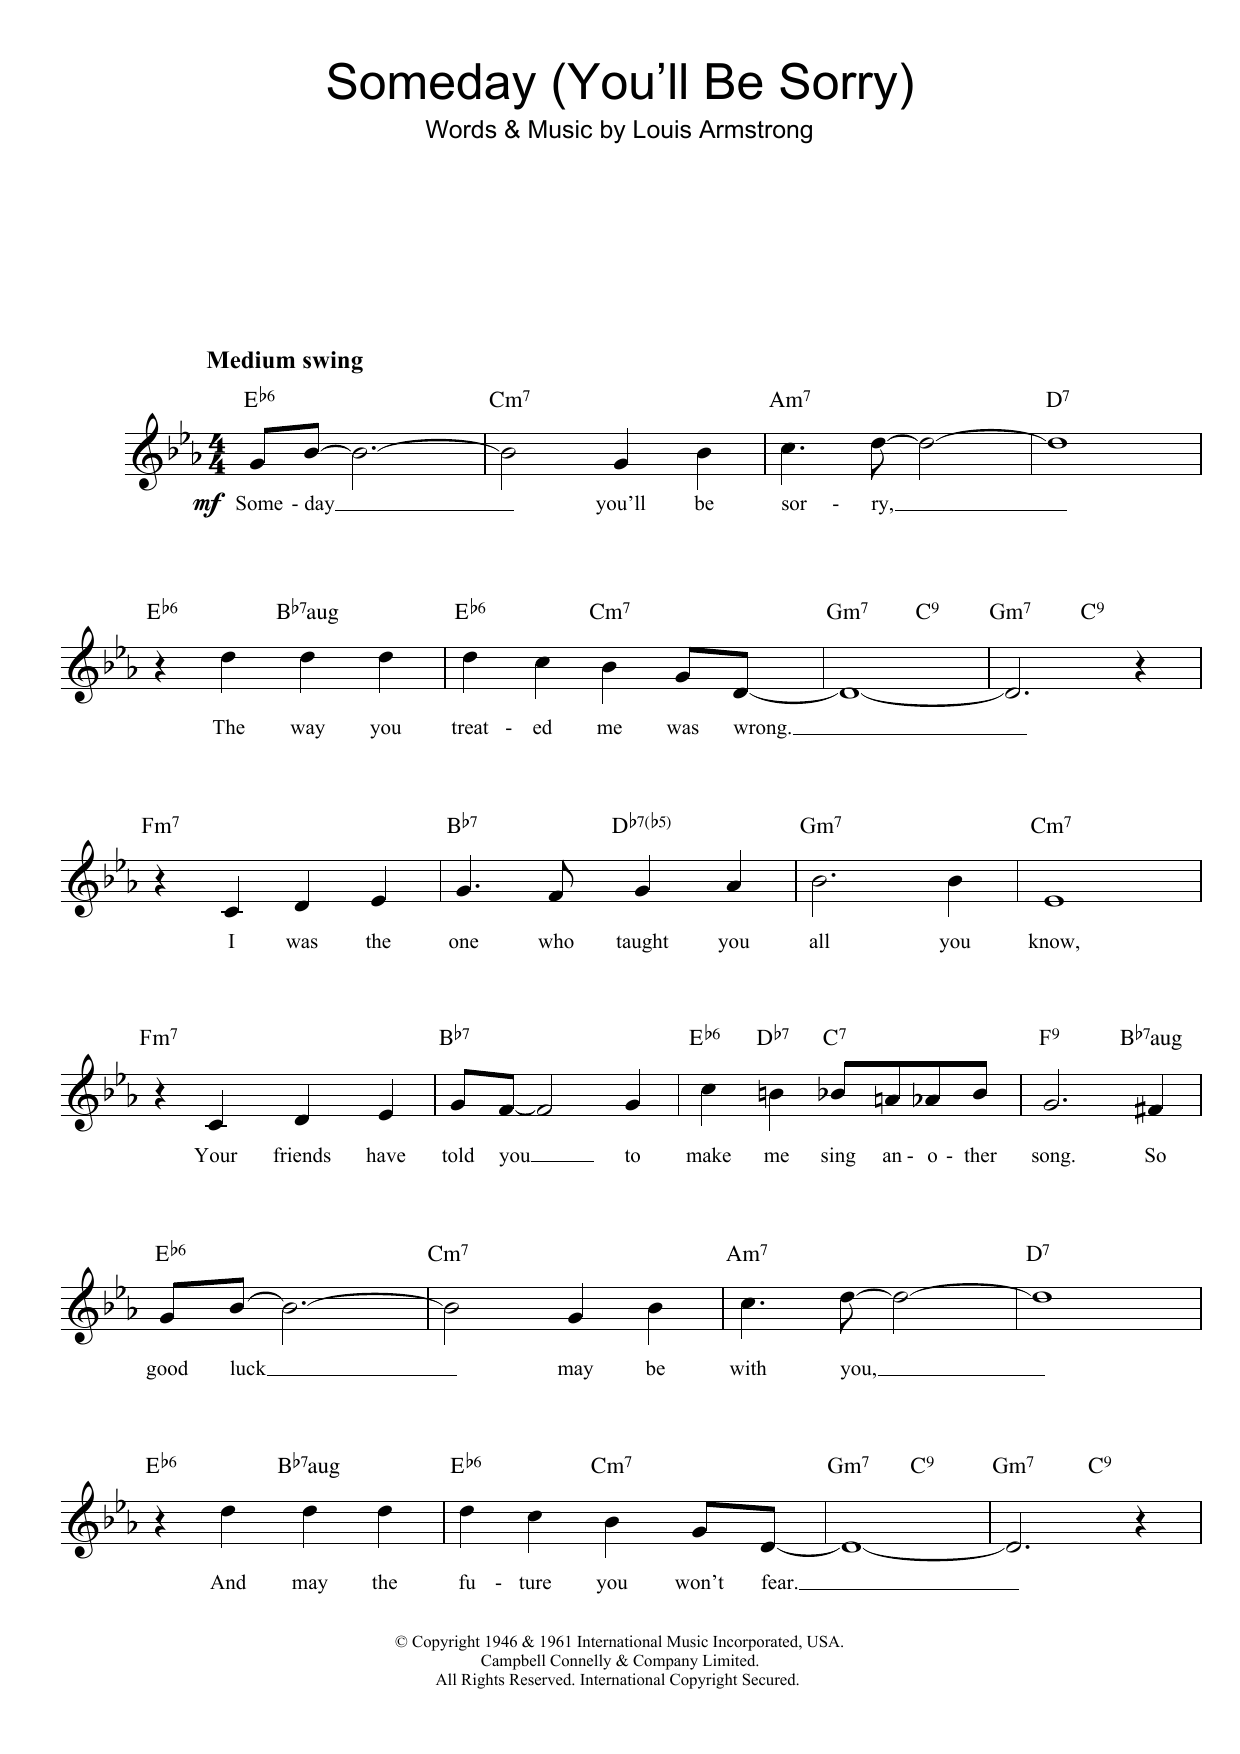 Louis Armstrong Someday (You'll Be Sorry) sheet music notes and chords. Download Printable PDF.